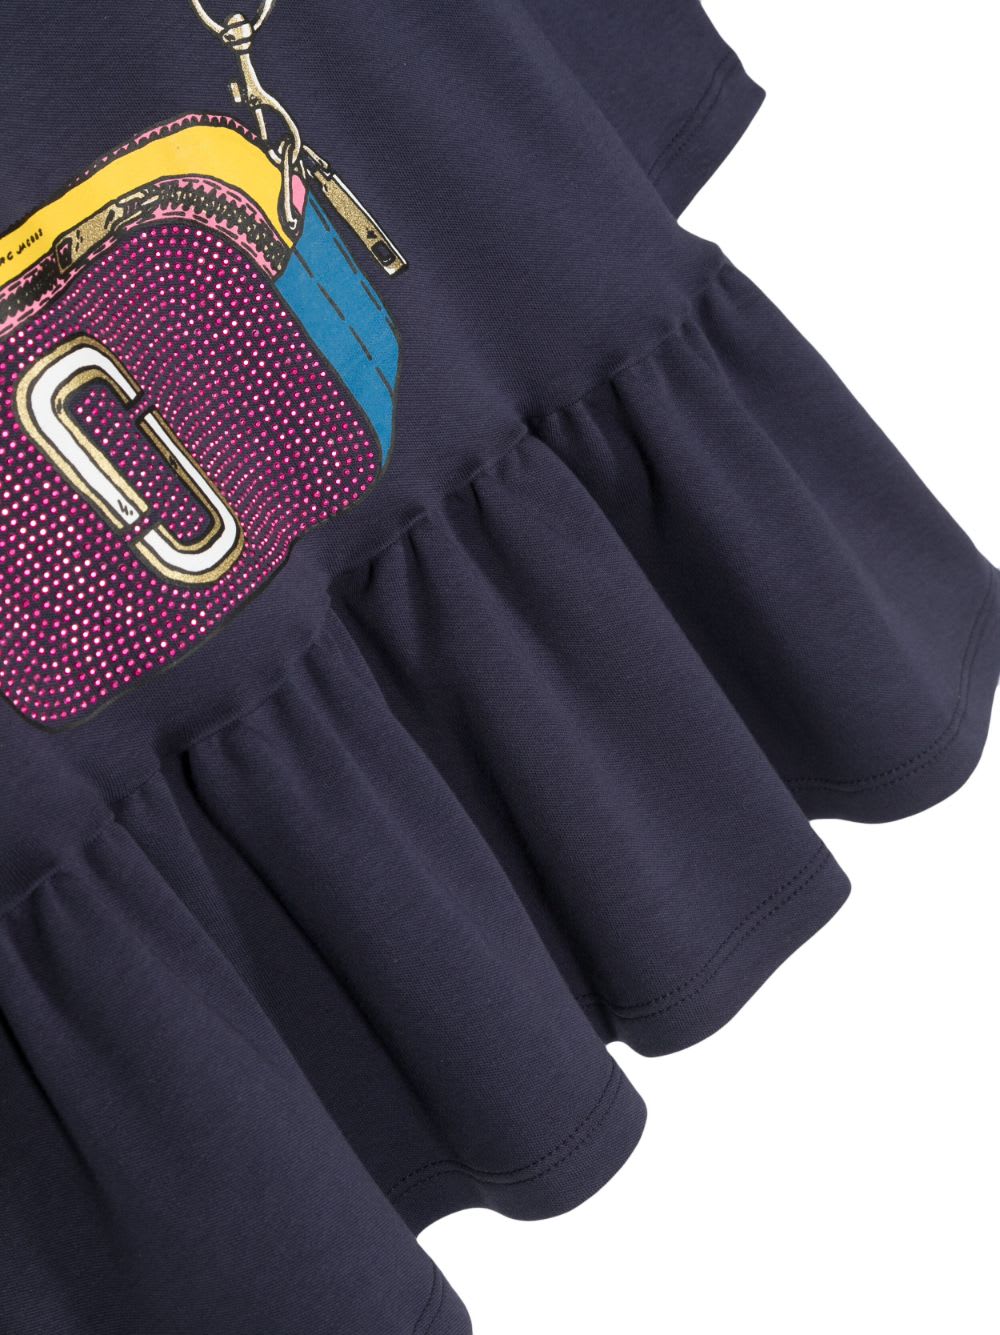 Shop Little Marc Jacobs Marc Jacobs Abito Blu Navy In Jersey Di Cotone Bambina